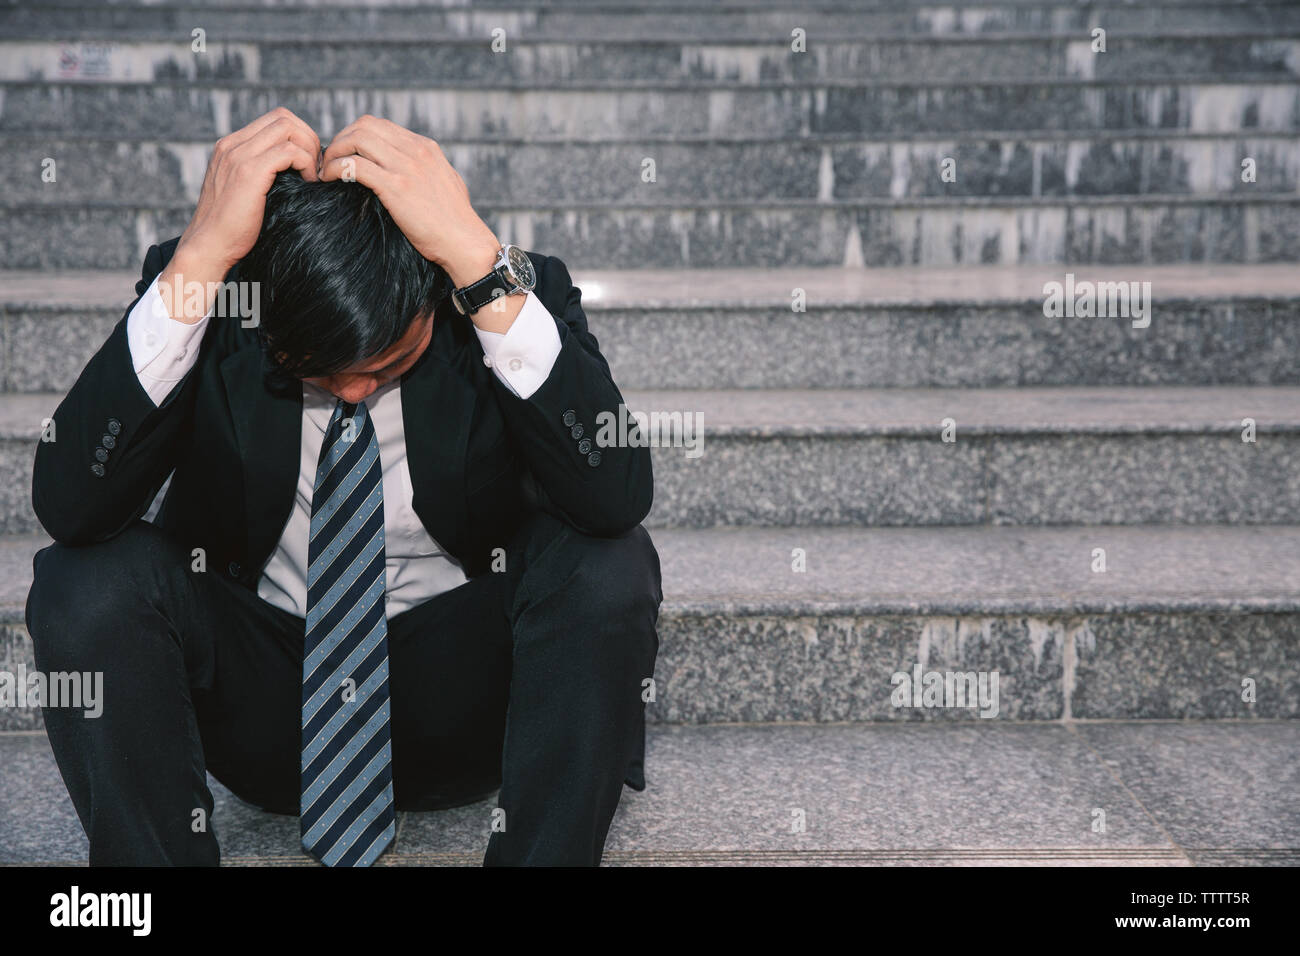 Asian businessmen with headaches or migraines at the city hall after work Images of young businessmen who are tired, stress, crisis, depression, failu Stock Photo